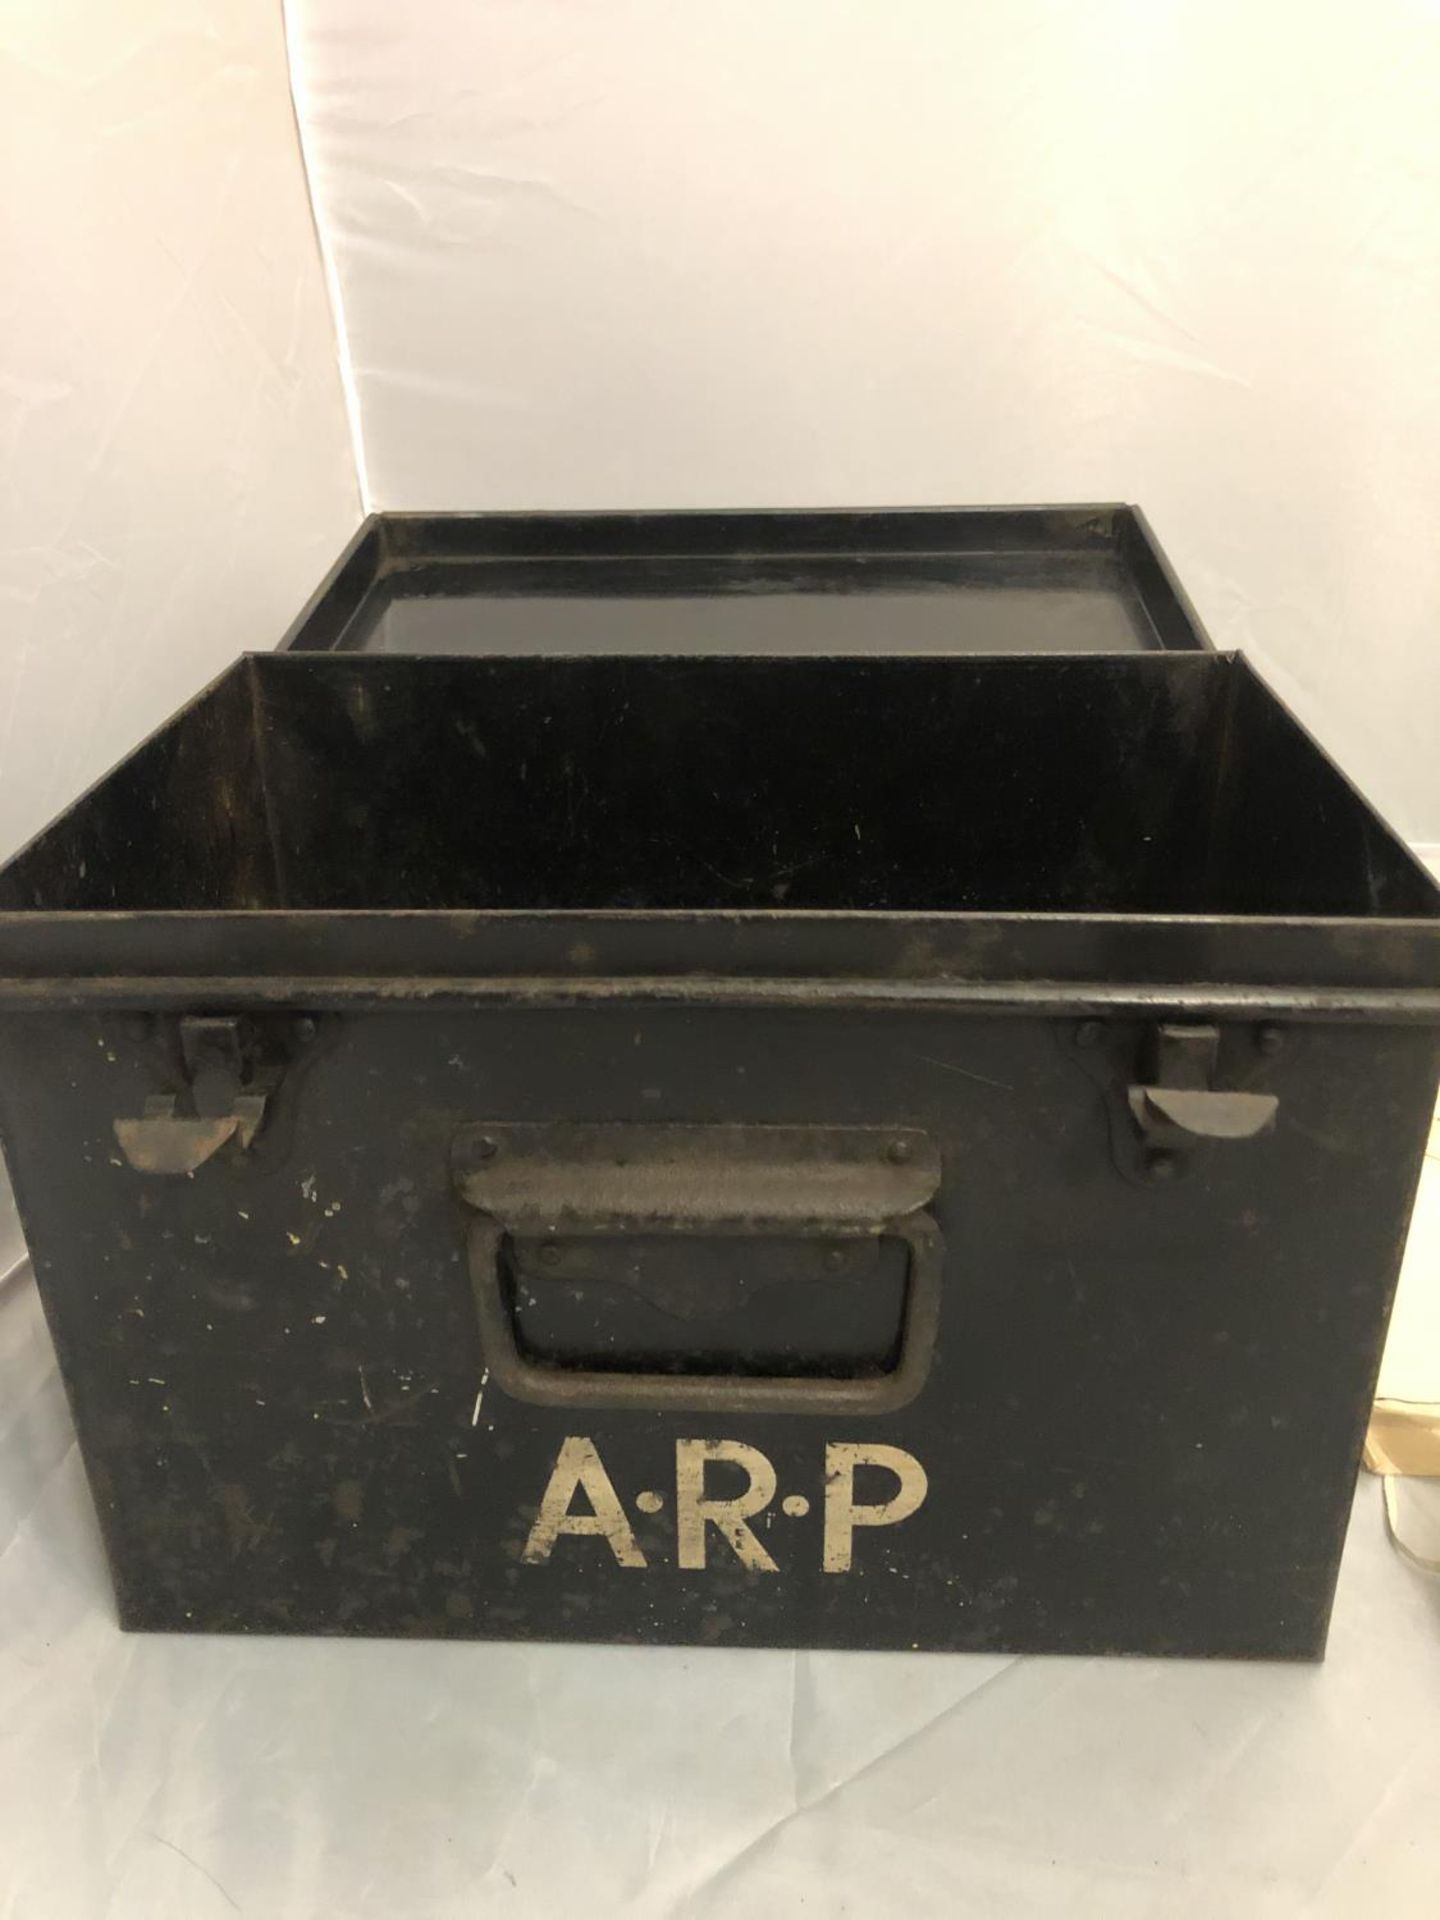 A WORLD WAR II A.R.P. TIN AND A FIRST AID KIT - Image 2 of 3